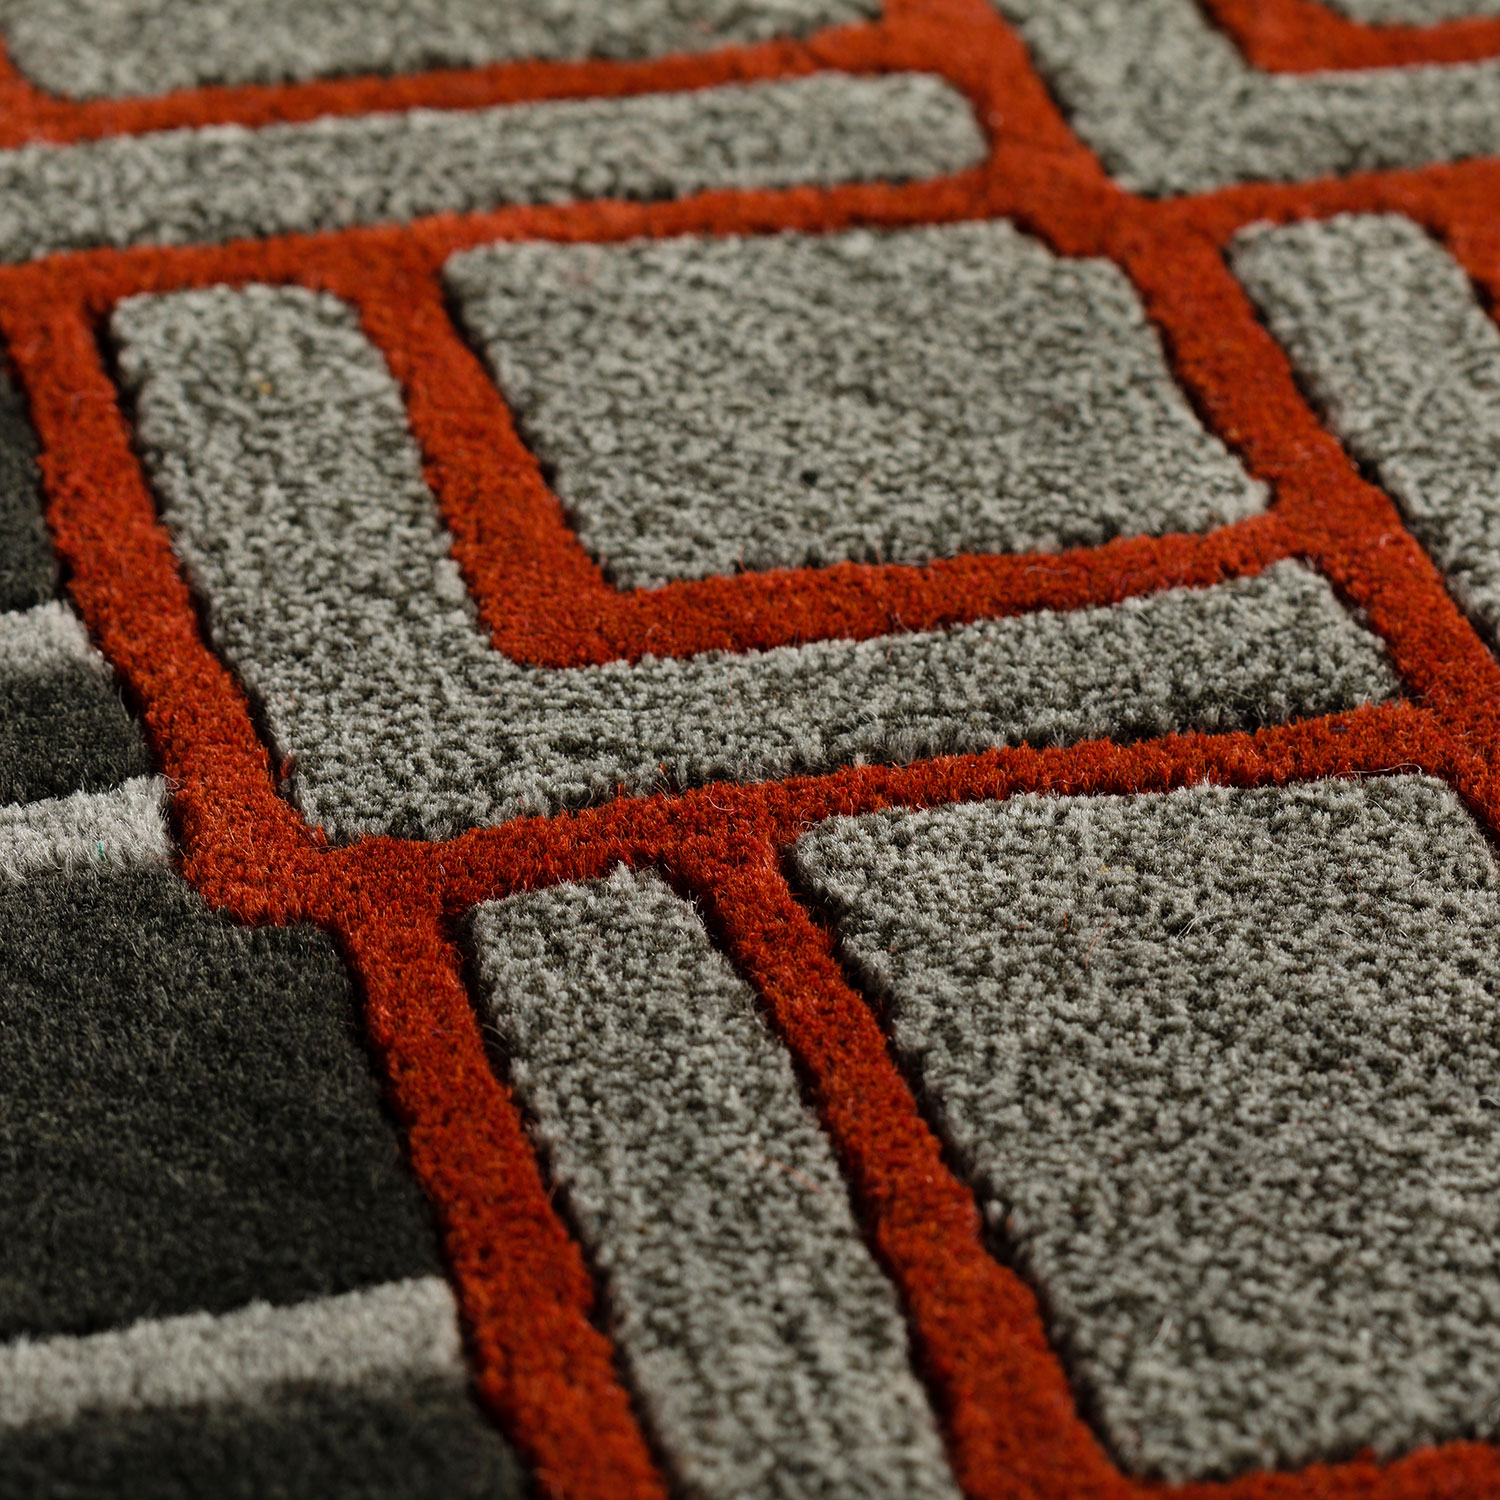 Agra rug closeup of red black and grey rug